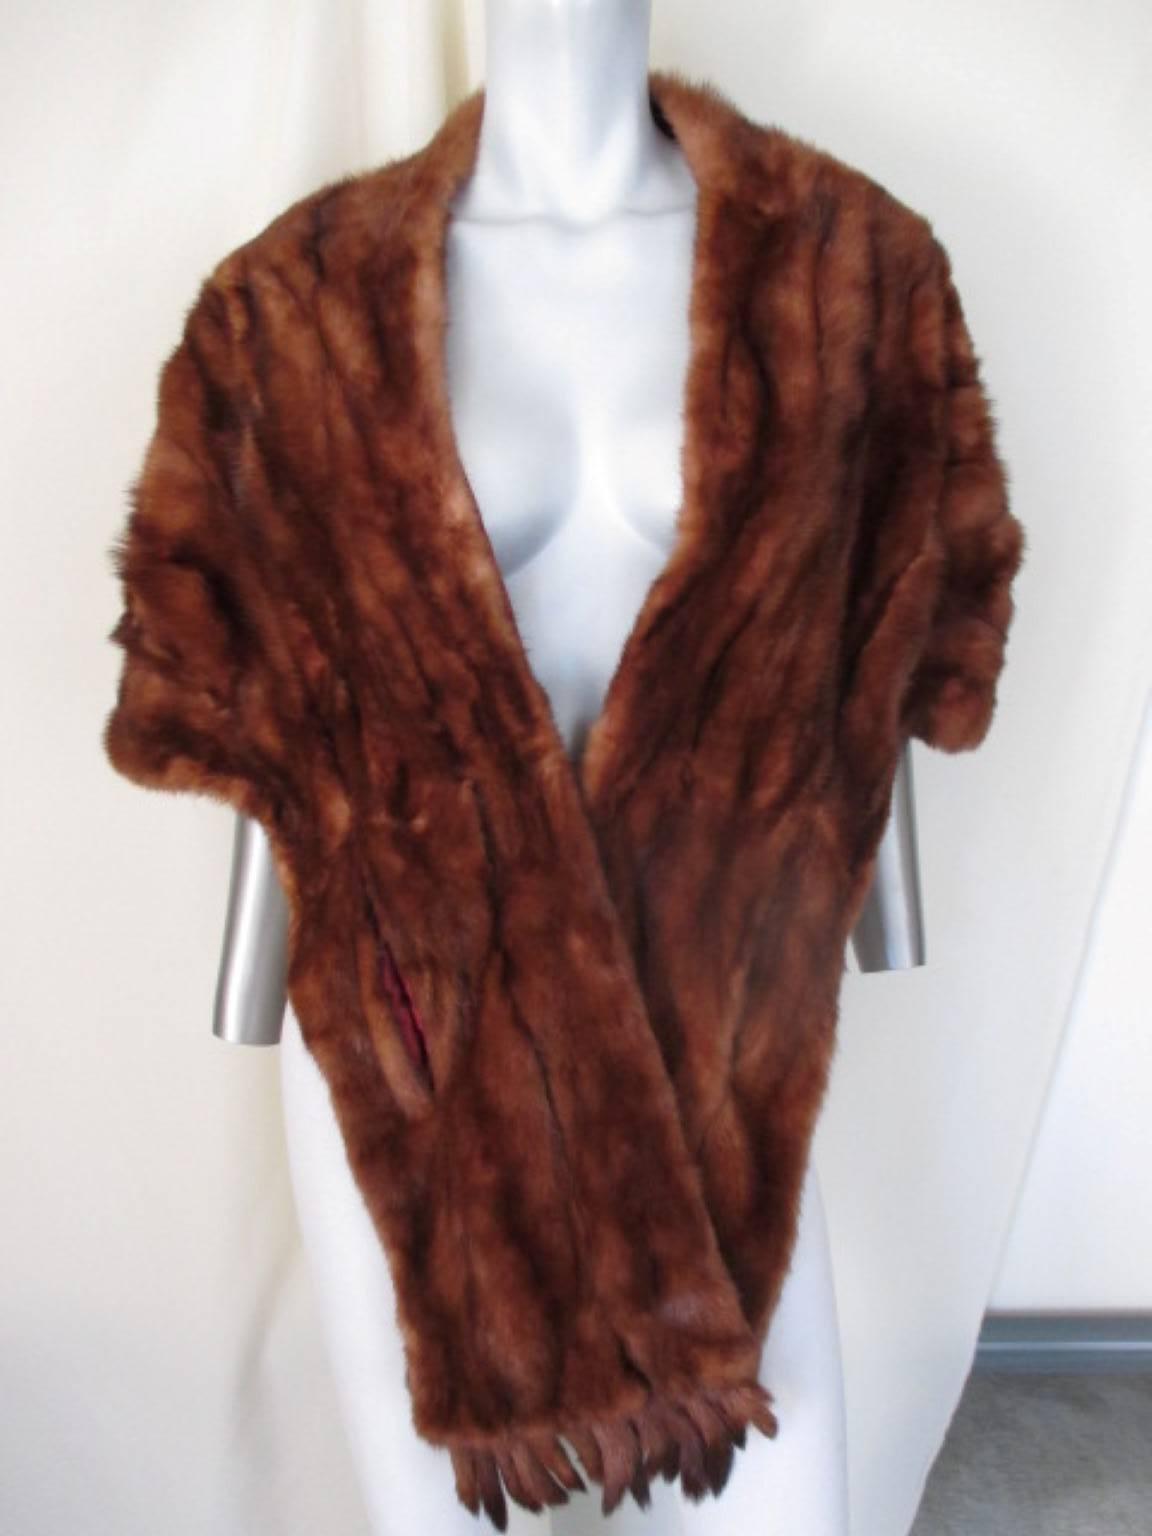 This stole is made of very soft silky mink fur with 2 pockets, 1 closing hook at the front and detachable fringe with pushbuttons.
Its light to wear and in very good vintage condition only the lining has some wear.
one size
Length about 180 cm/